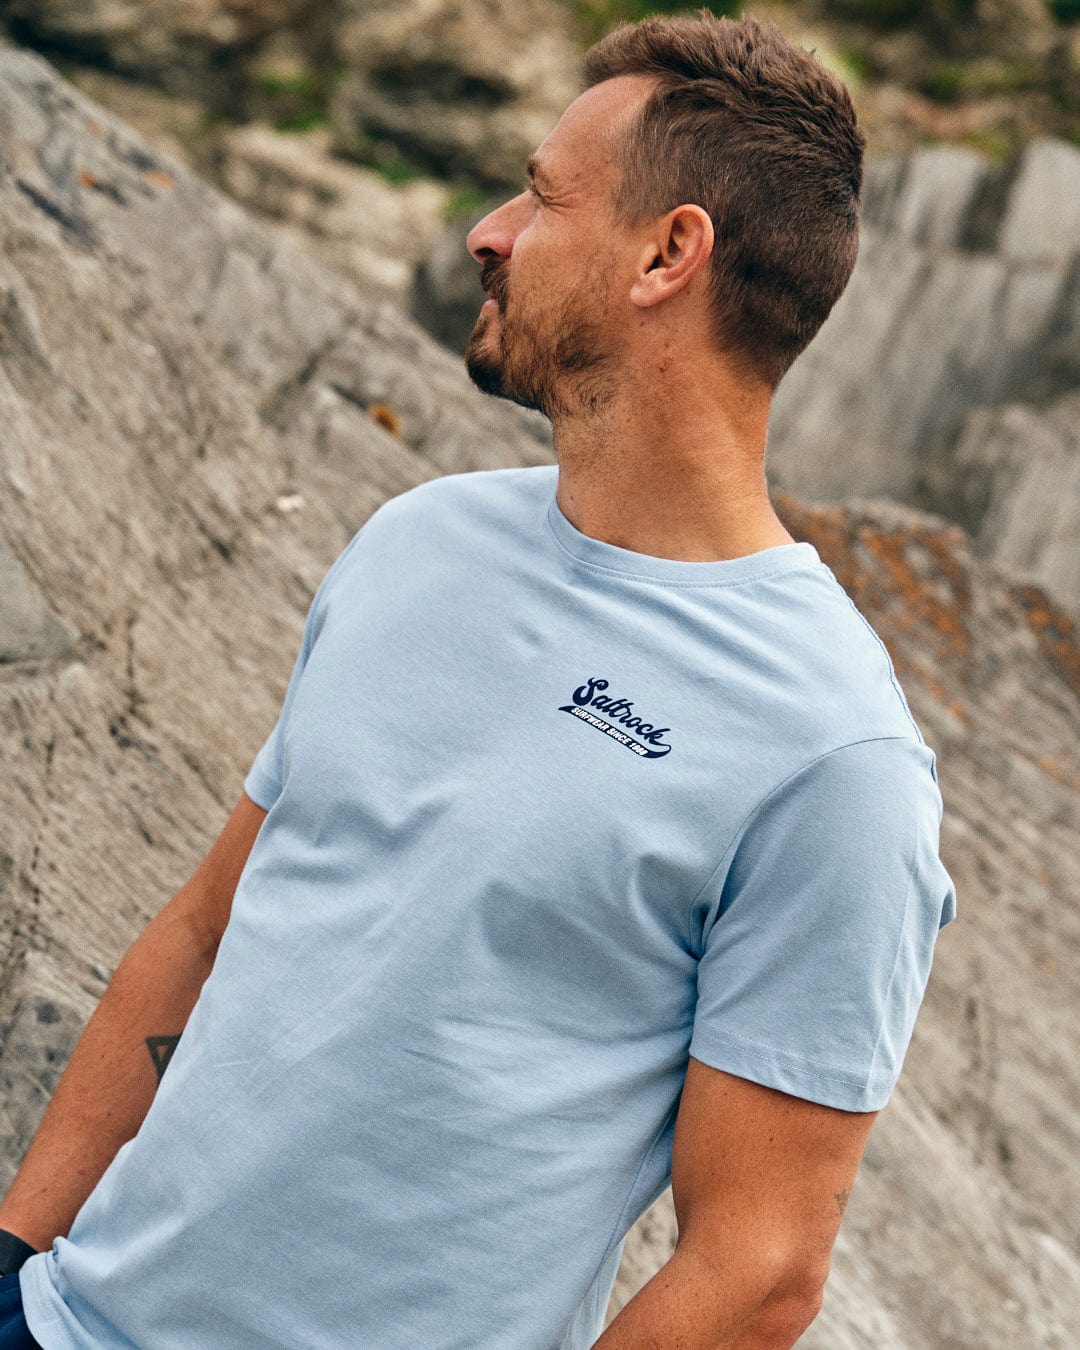 A man in a light blue, 100% cotton Saltrock Home Run - Mens T-Shirt - Blue stands outdoors with a rocky background, looking to his right.